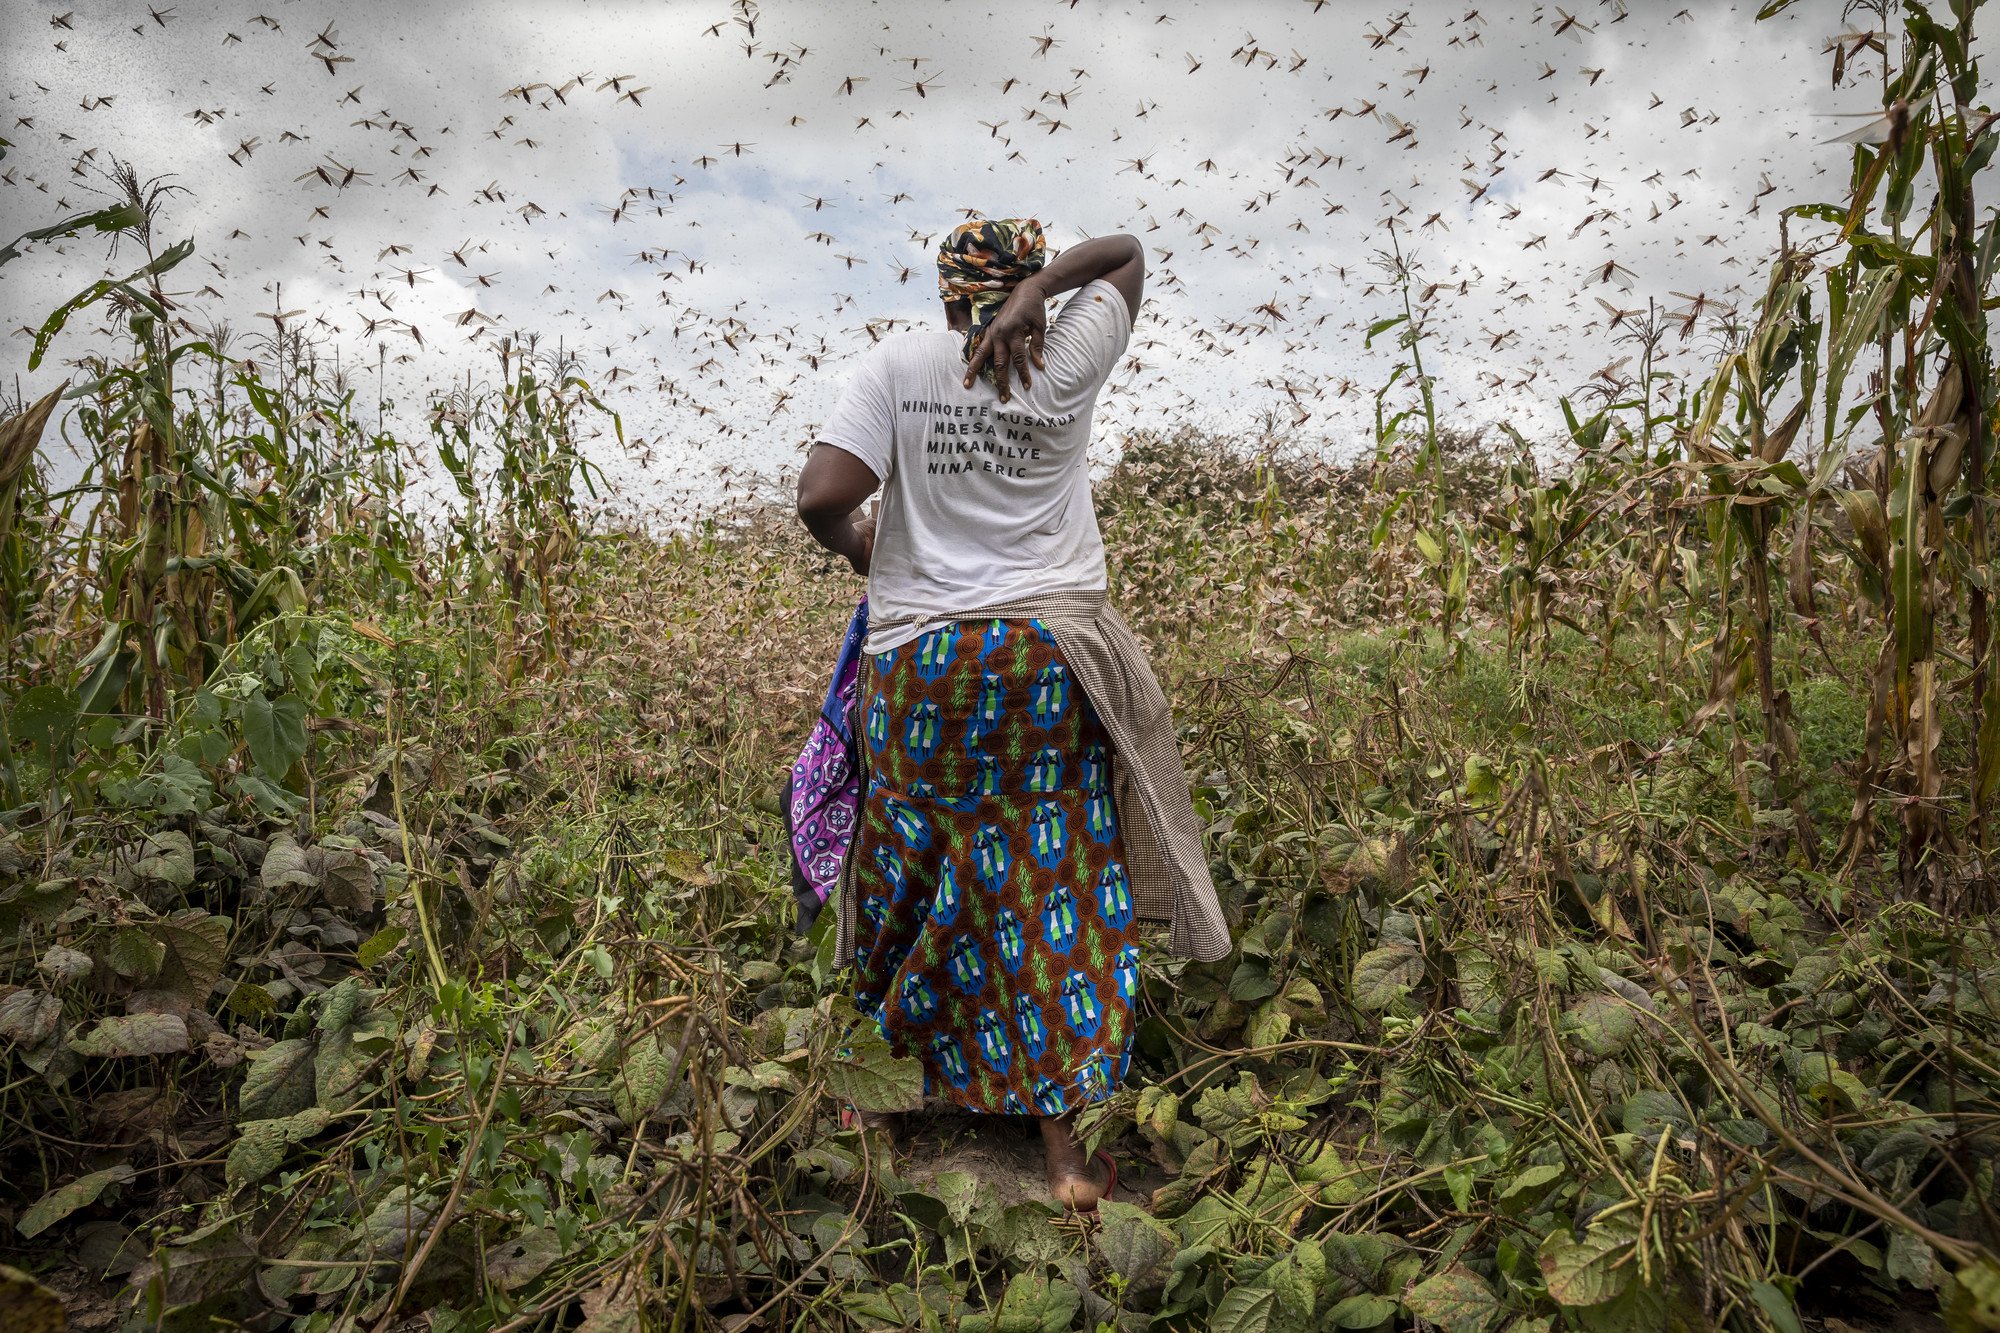 Many in Africa are experiencing a double whammy with both the locust infestation and outbreak of the coronavirus. Pesticide stock has also been dwindling as border closures have strangled supply and overnight curfews restrict the ability of pilots to spray insecticide in key breeding areas. According to the African Development Bank, African economies will likely go into recession in 2020 with an expected loss of at least USD$150 billion. (Photo: Petterik Wiggers / Oxfam)